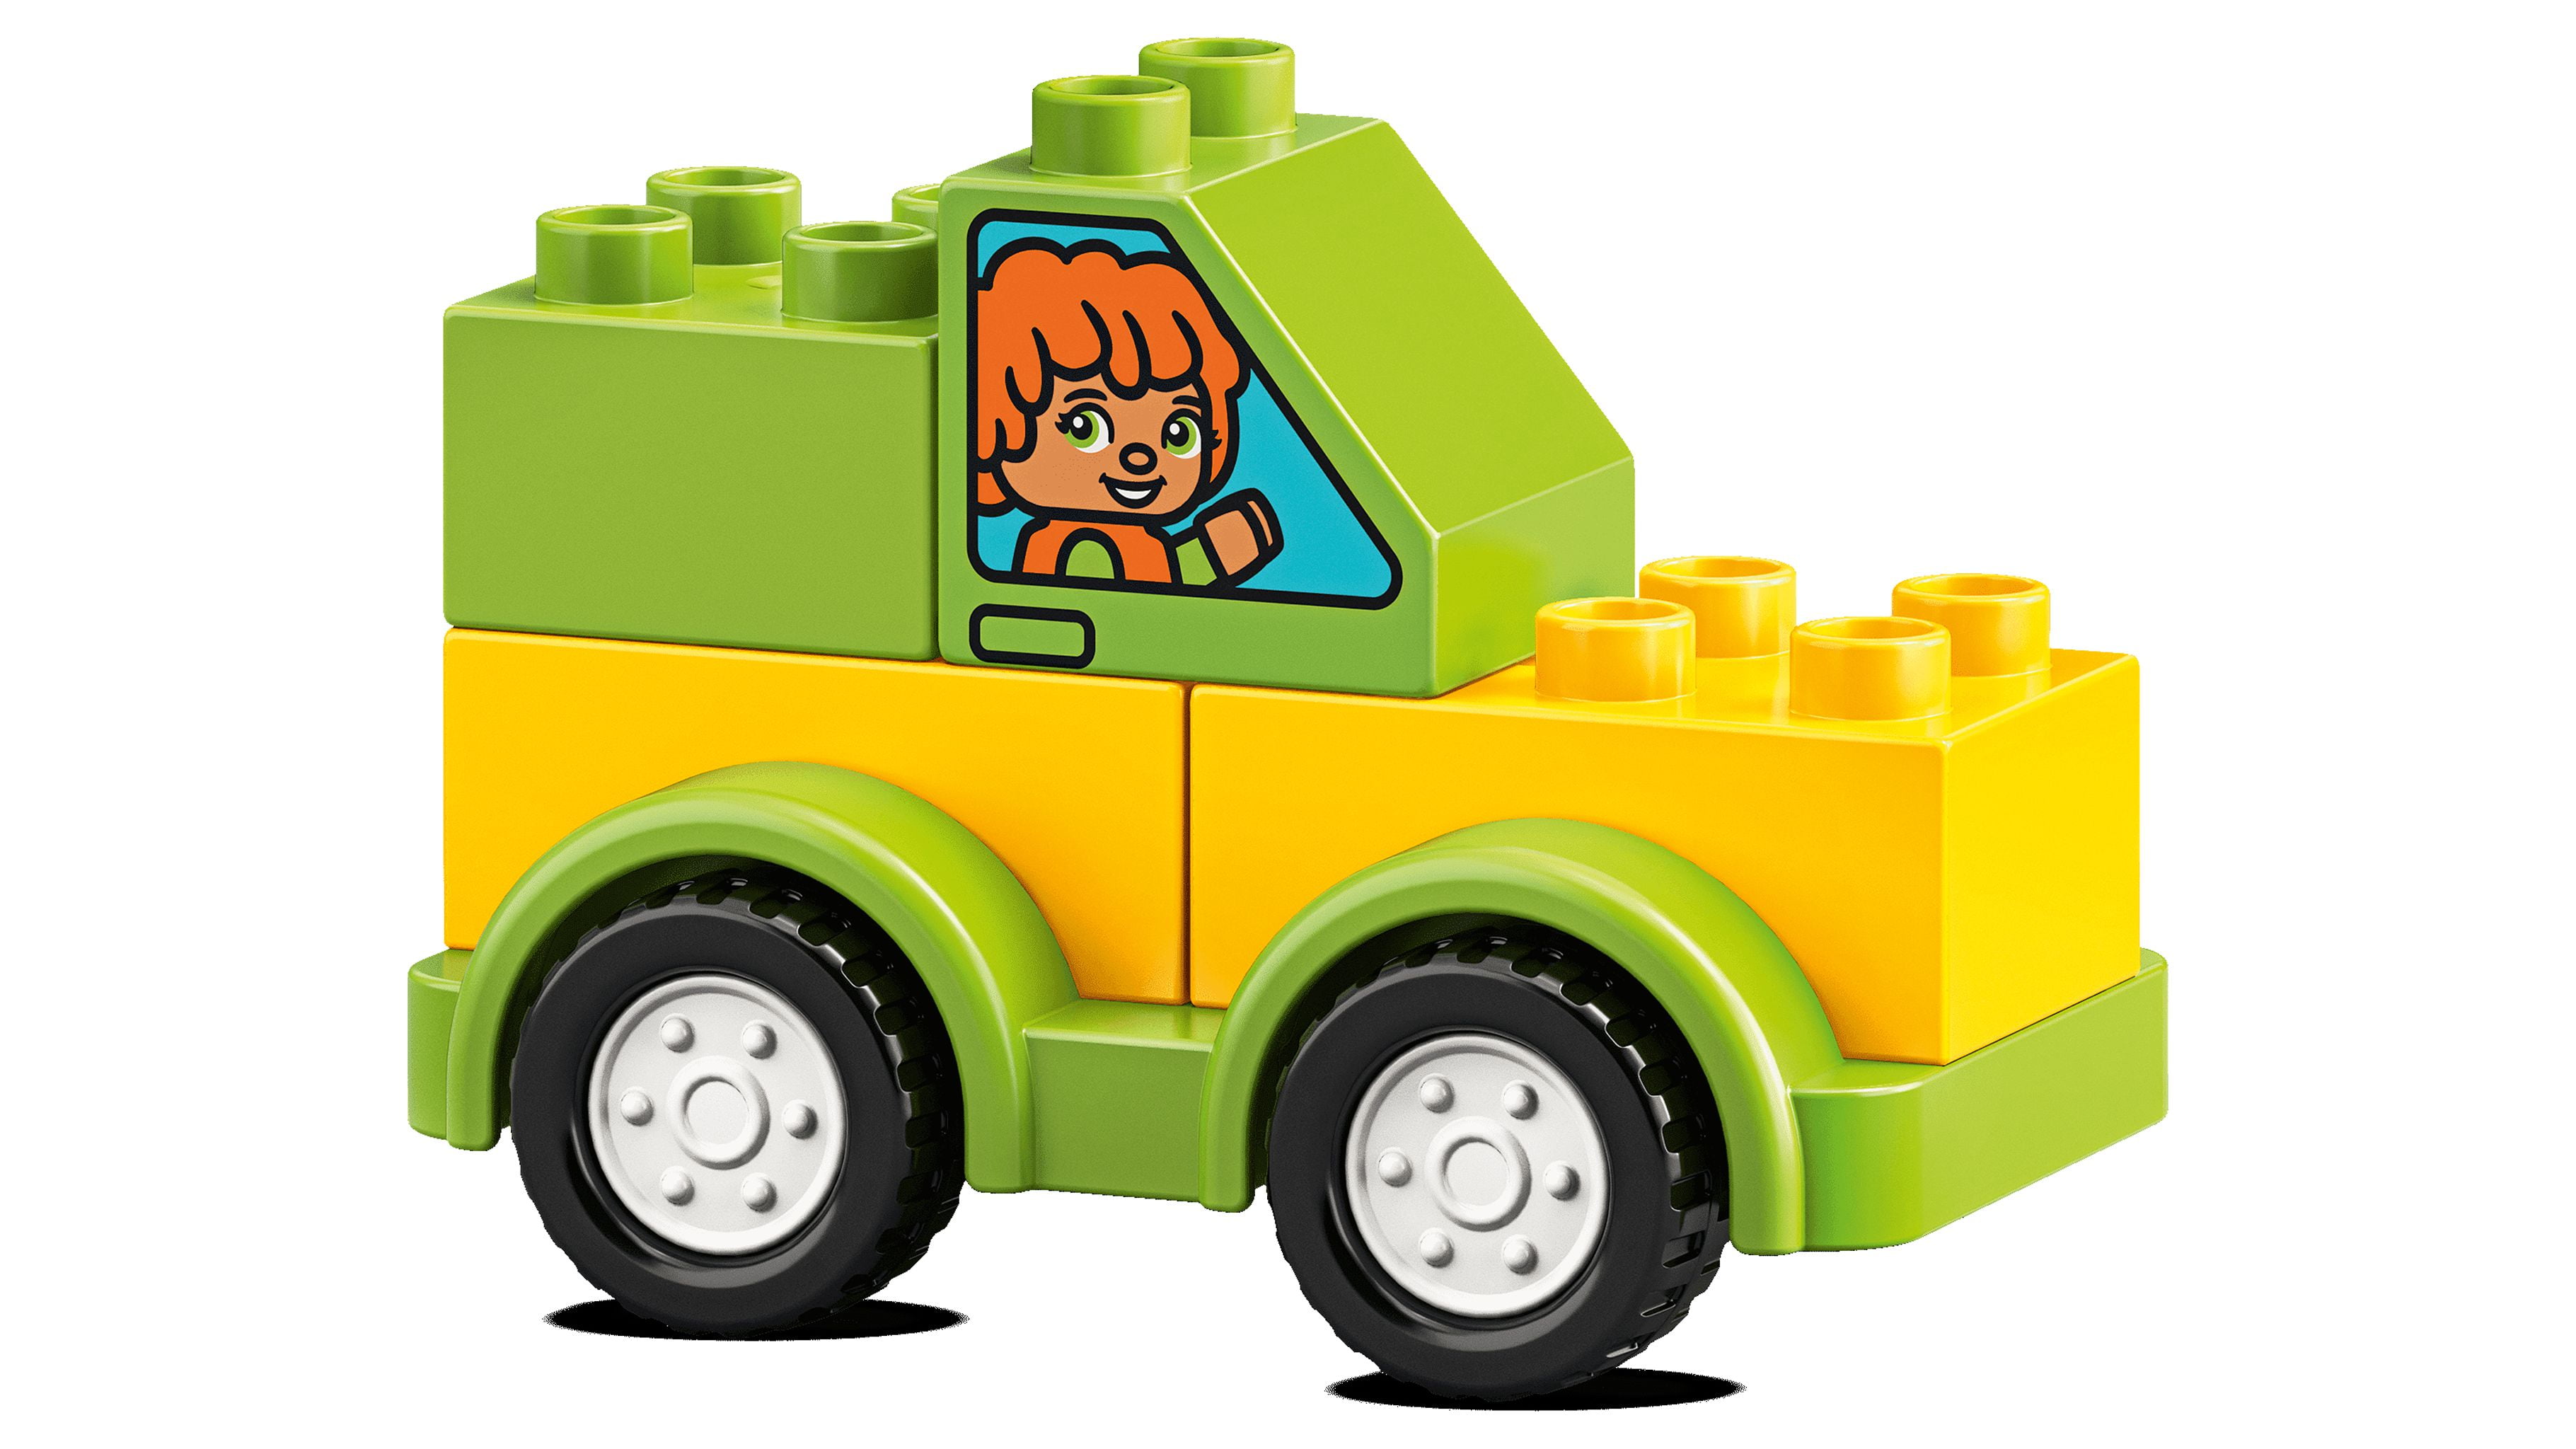  LEGO DUPLO My First Car Creations 10886 Building